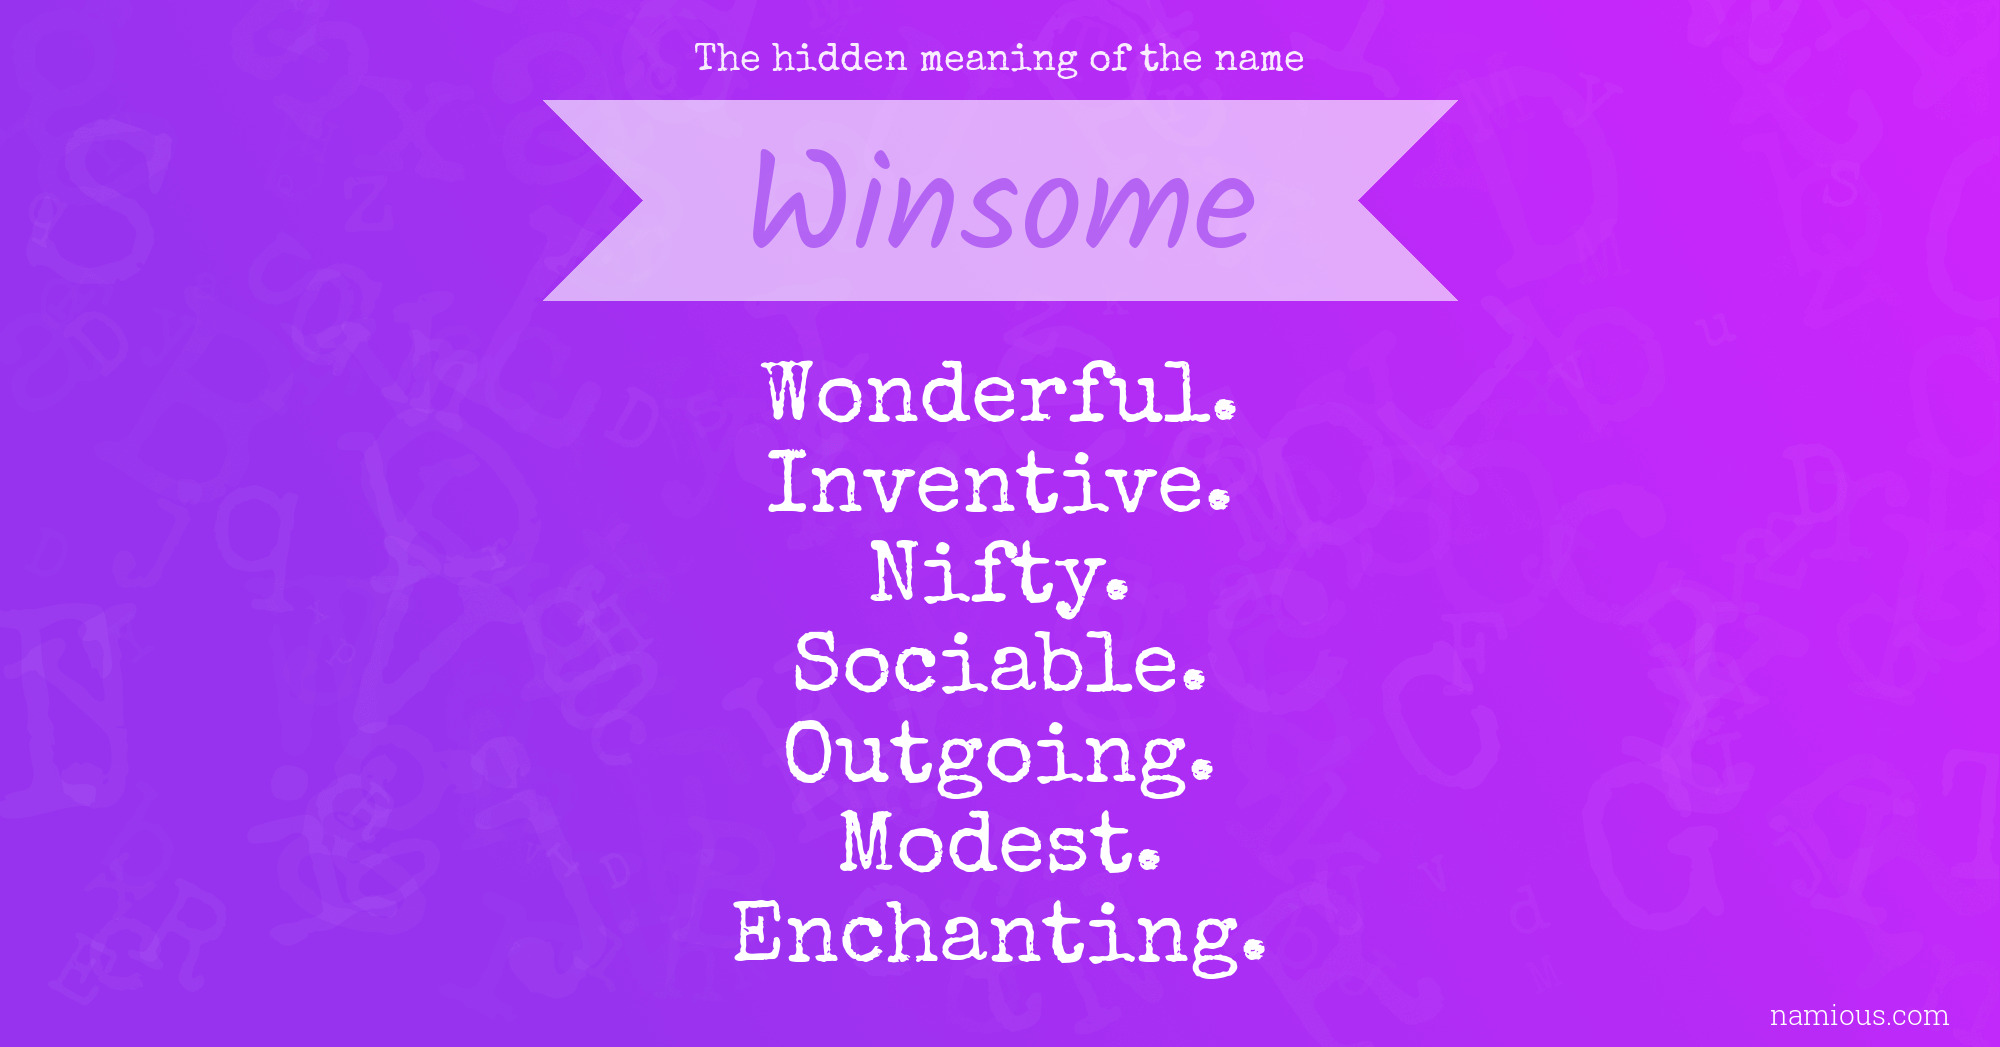 The hidden meaning of the name Winsome